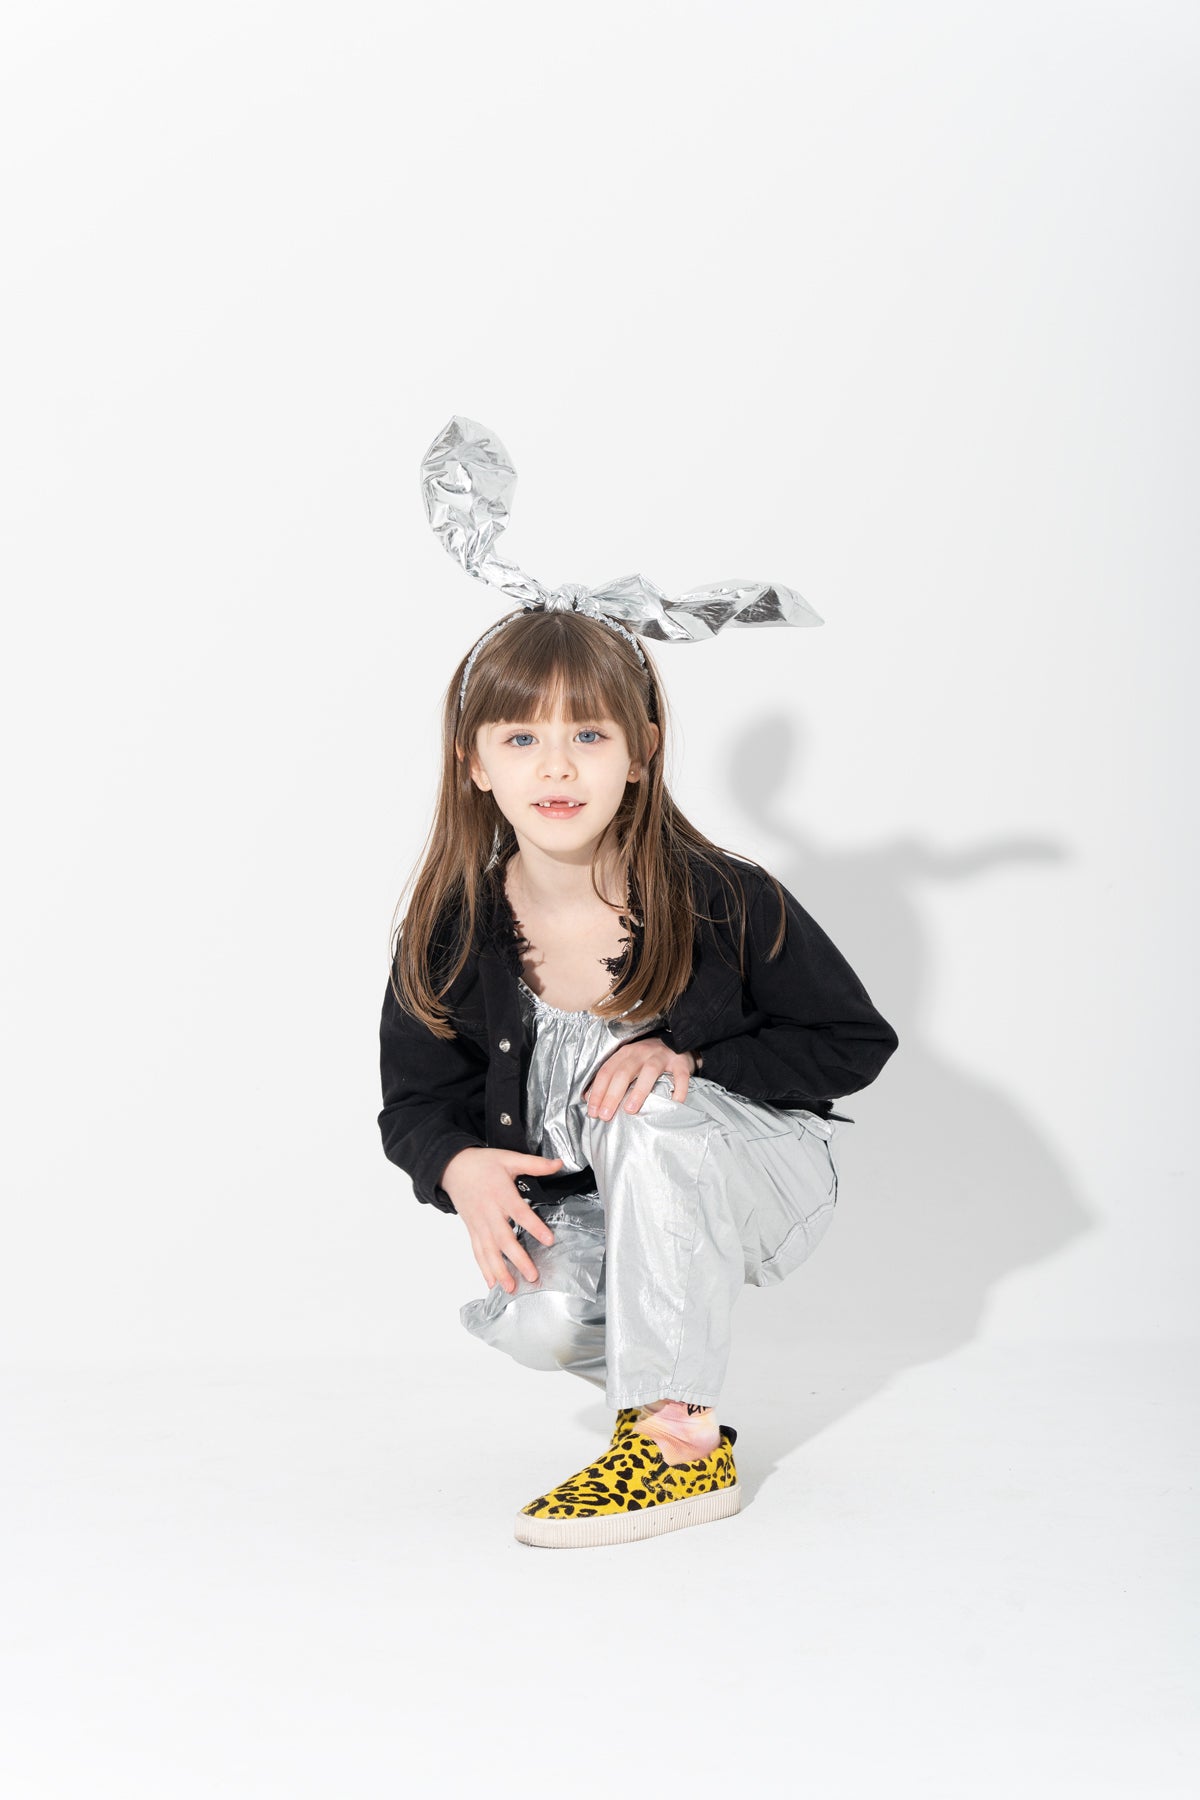 FOIL CARGO TROUSERS  makids